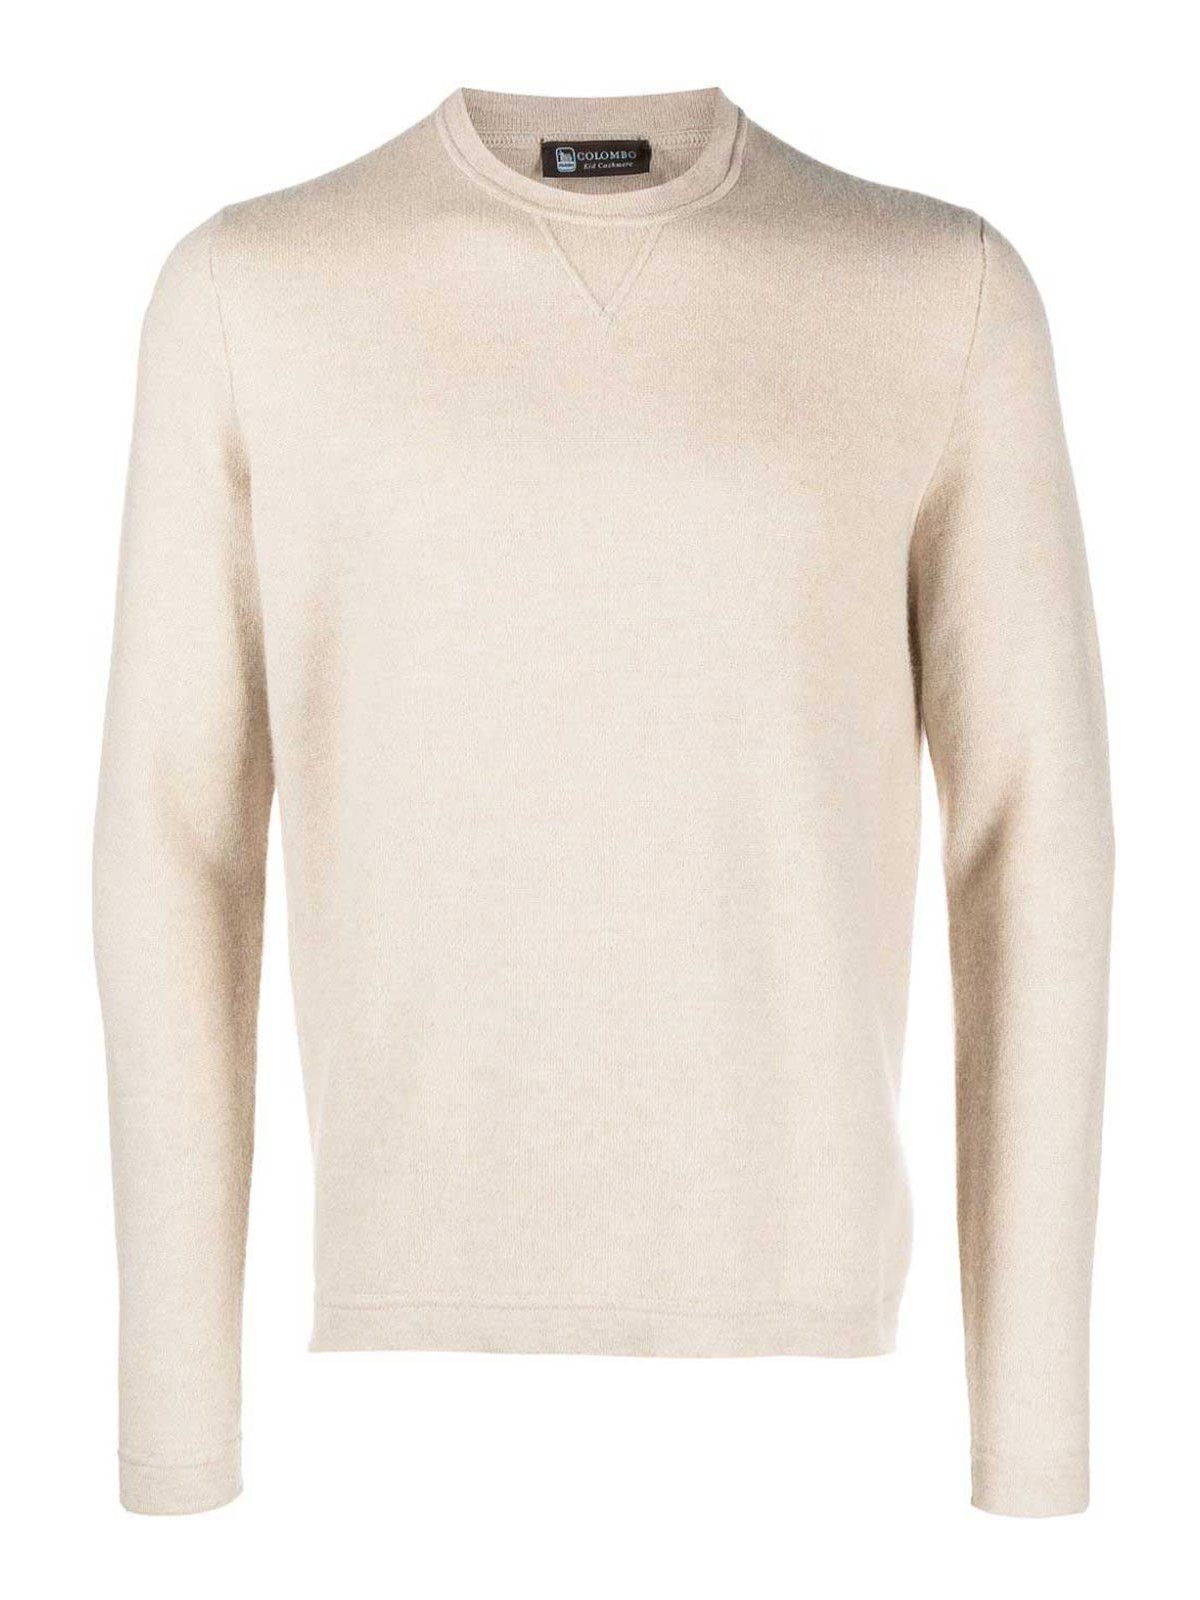 Colombo Cashmere Crewneck Sweater In Beige